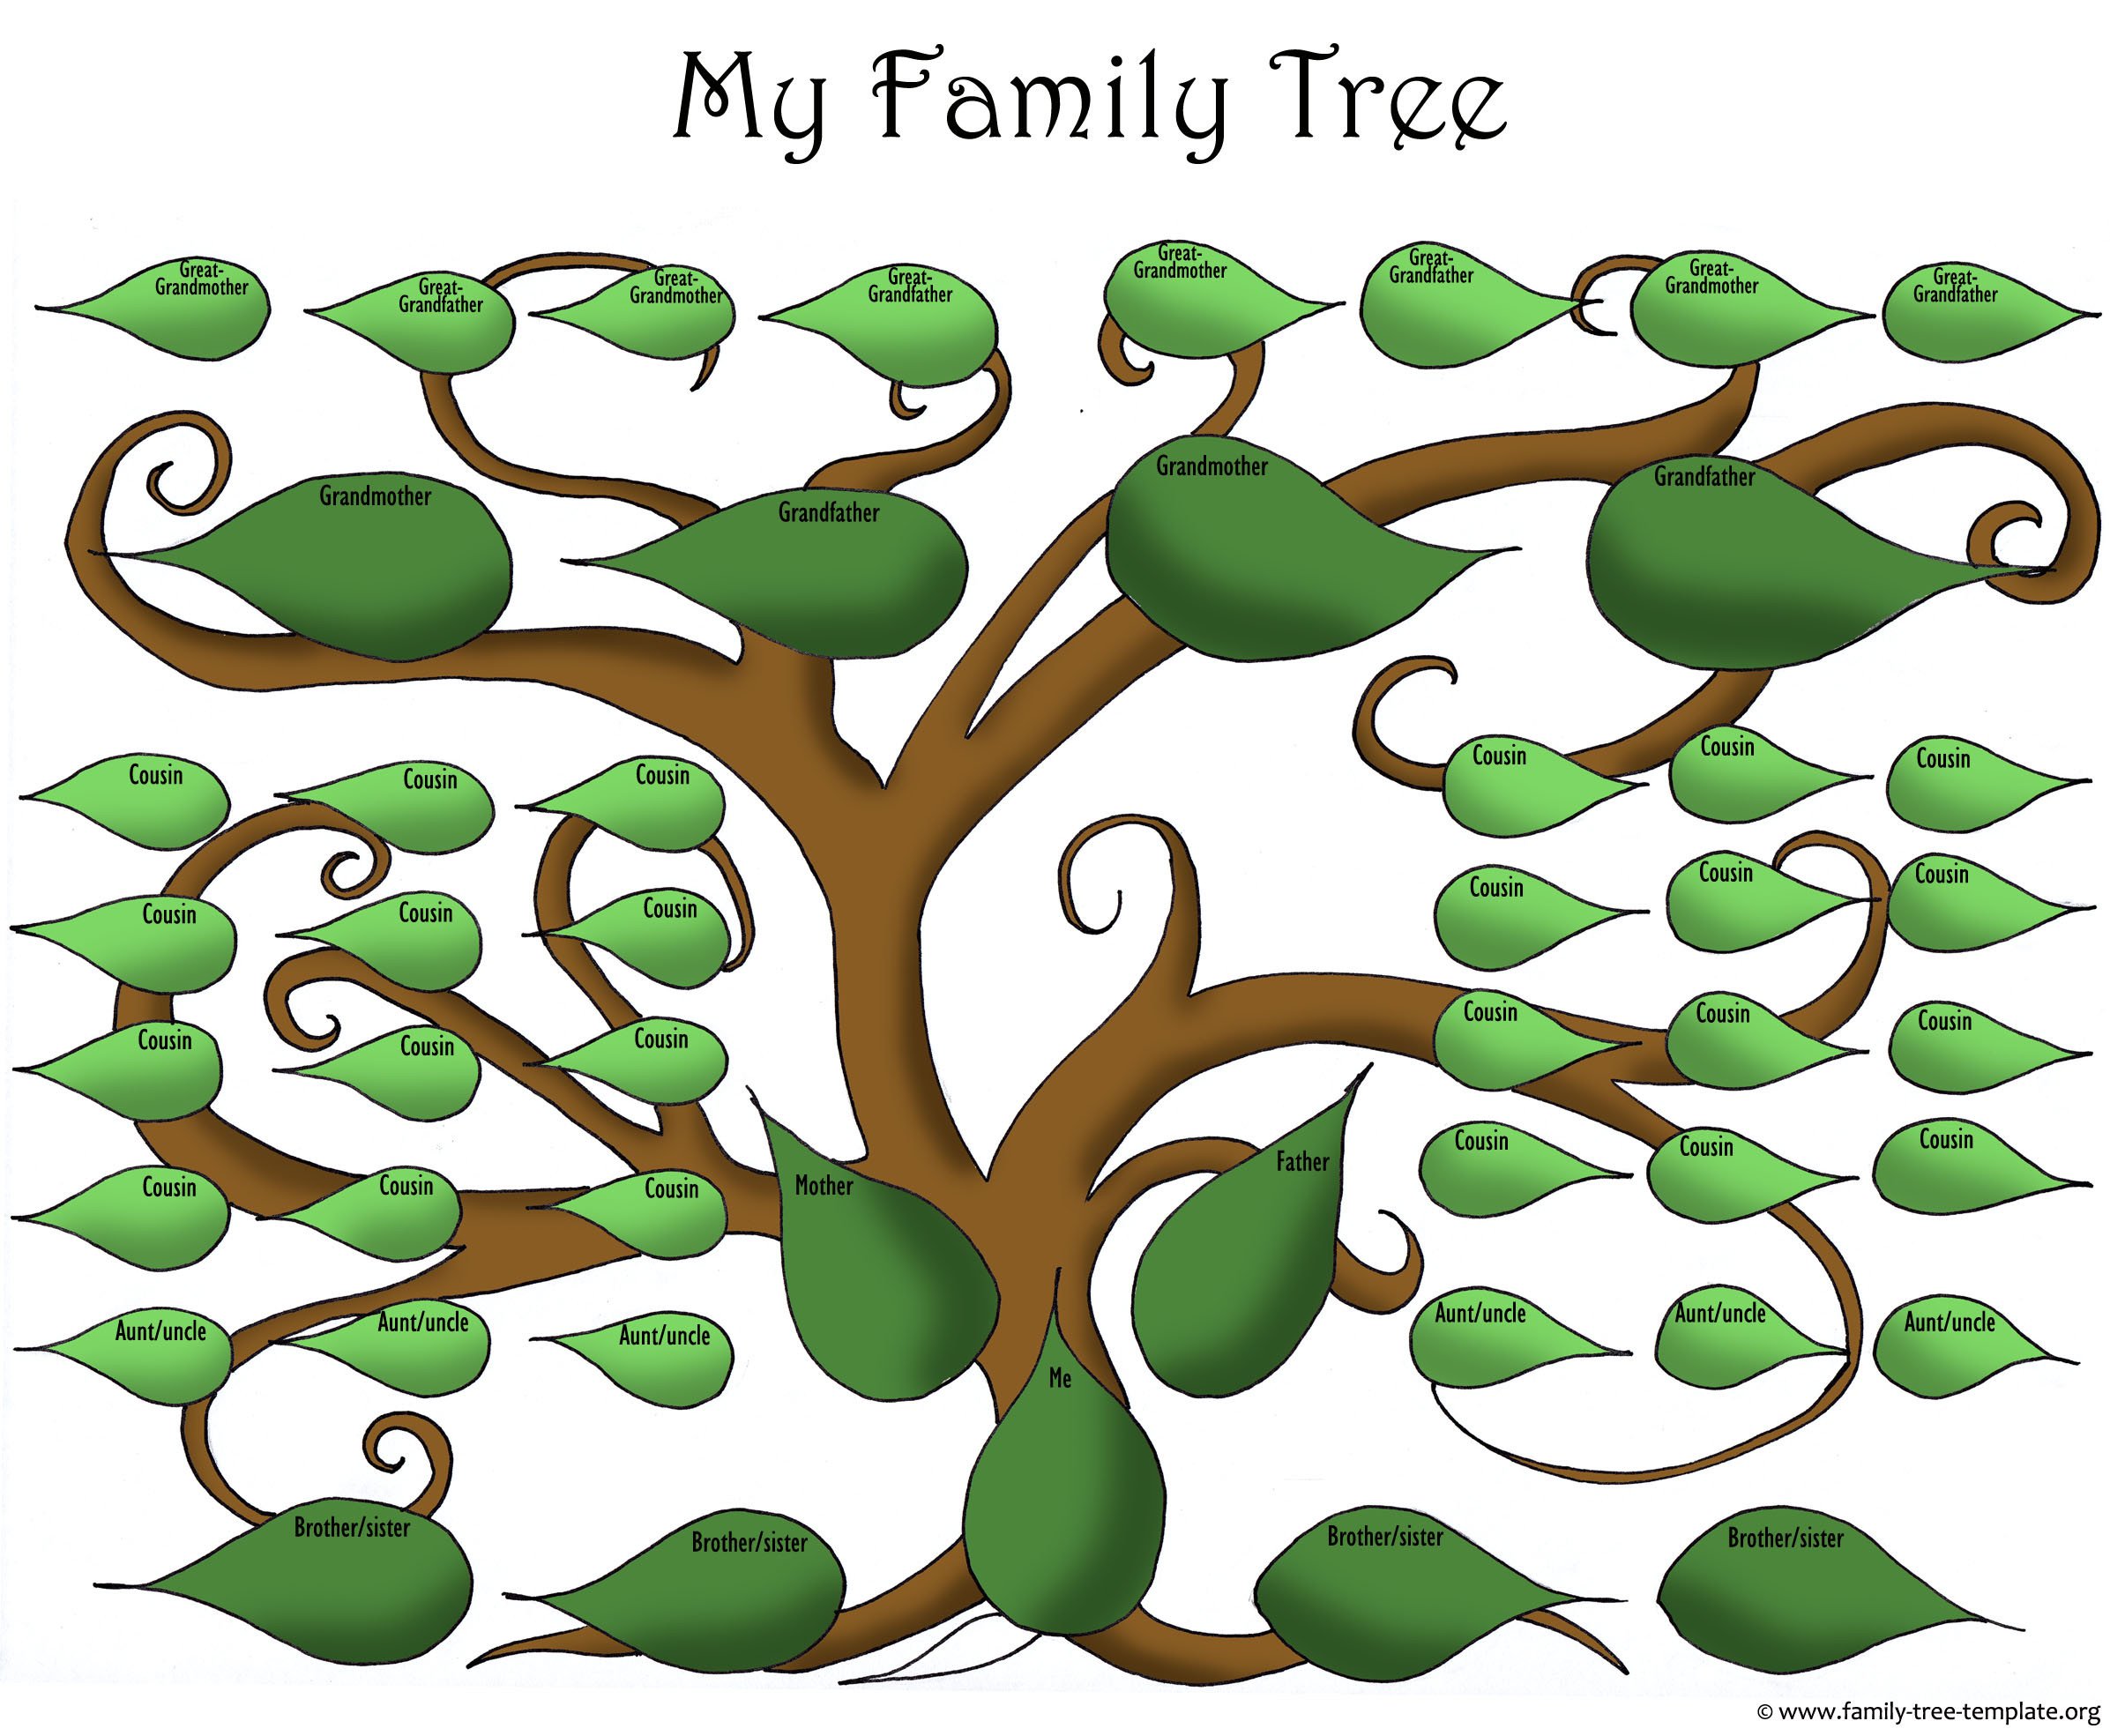 A Printable Blank Family Tree to Make Your Kids Genealogy